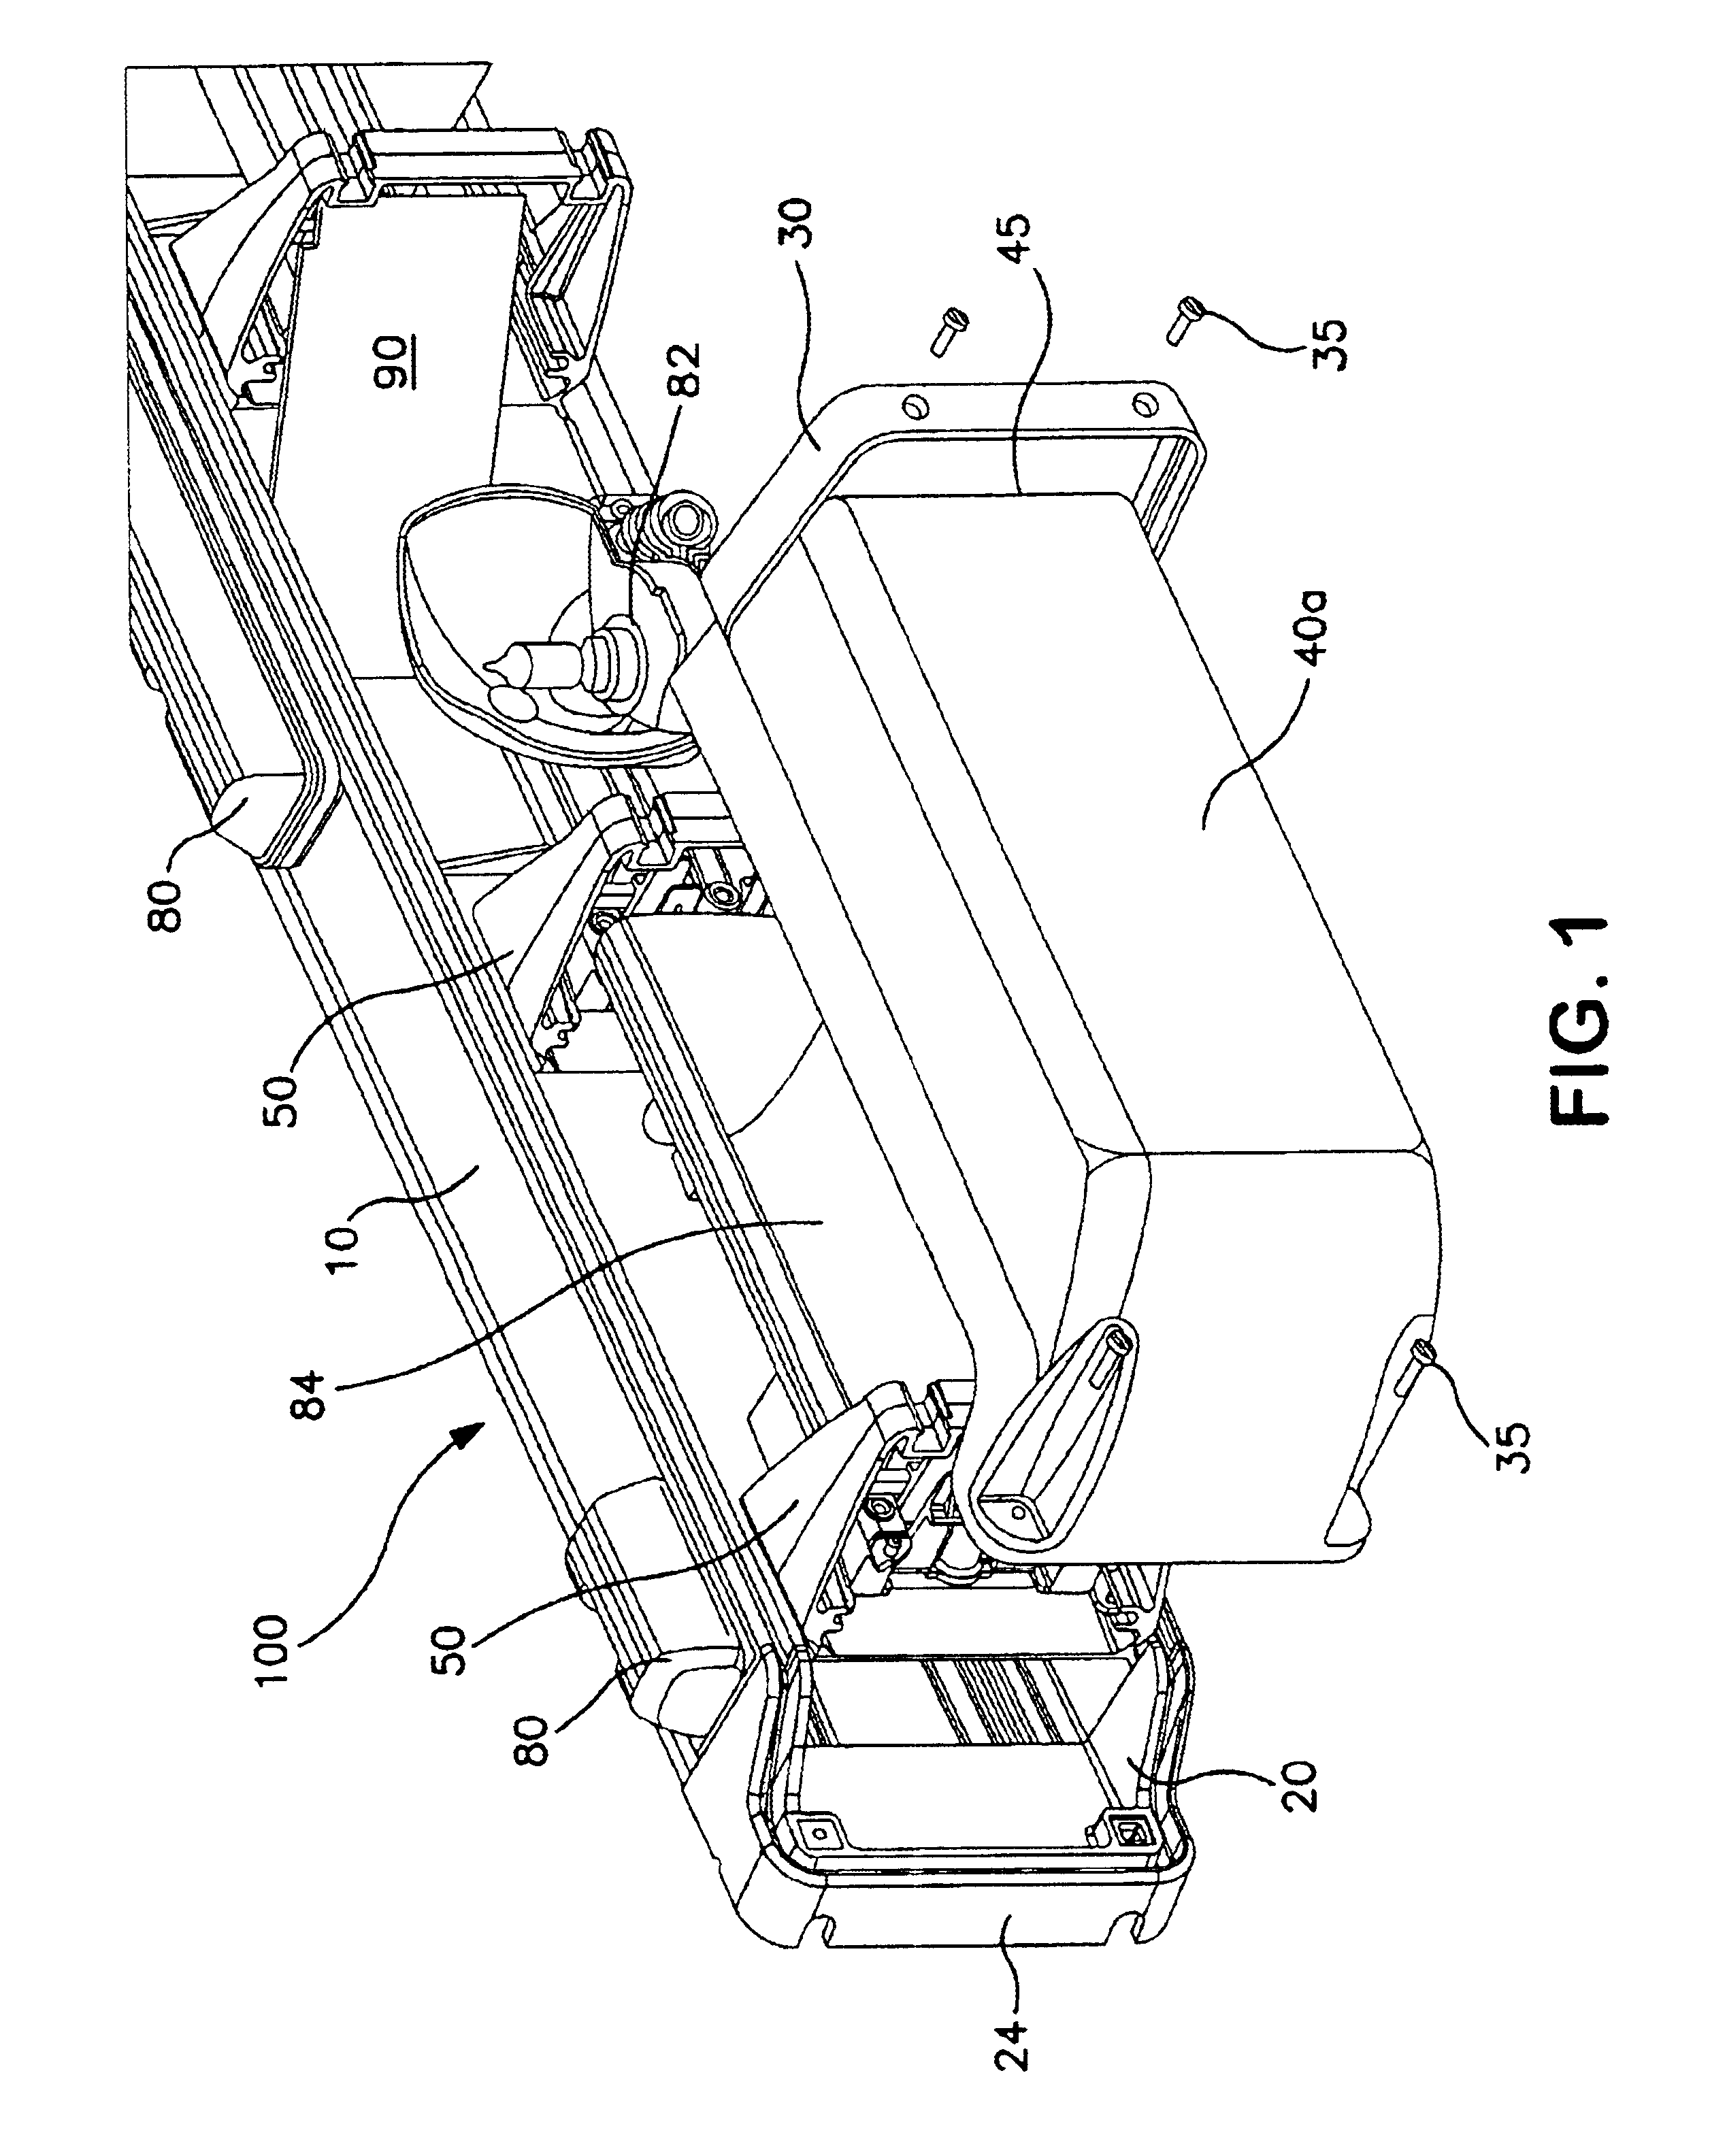 Light bar with integrated warning illumination and lens support structure